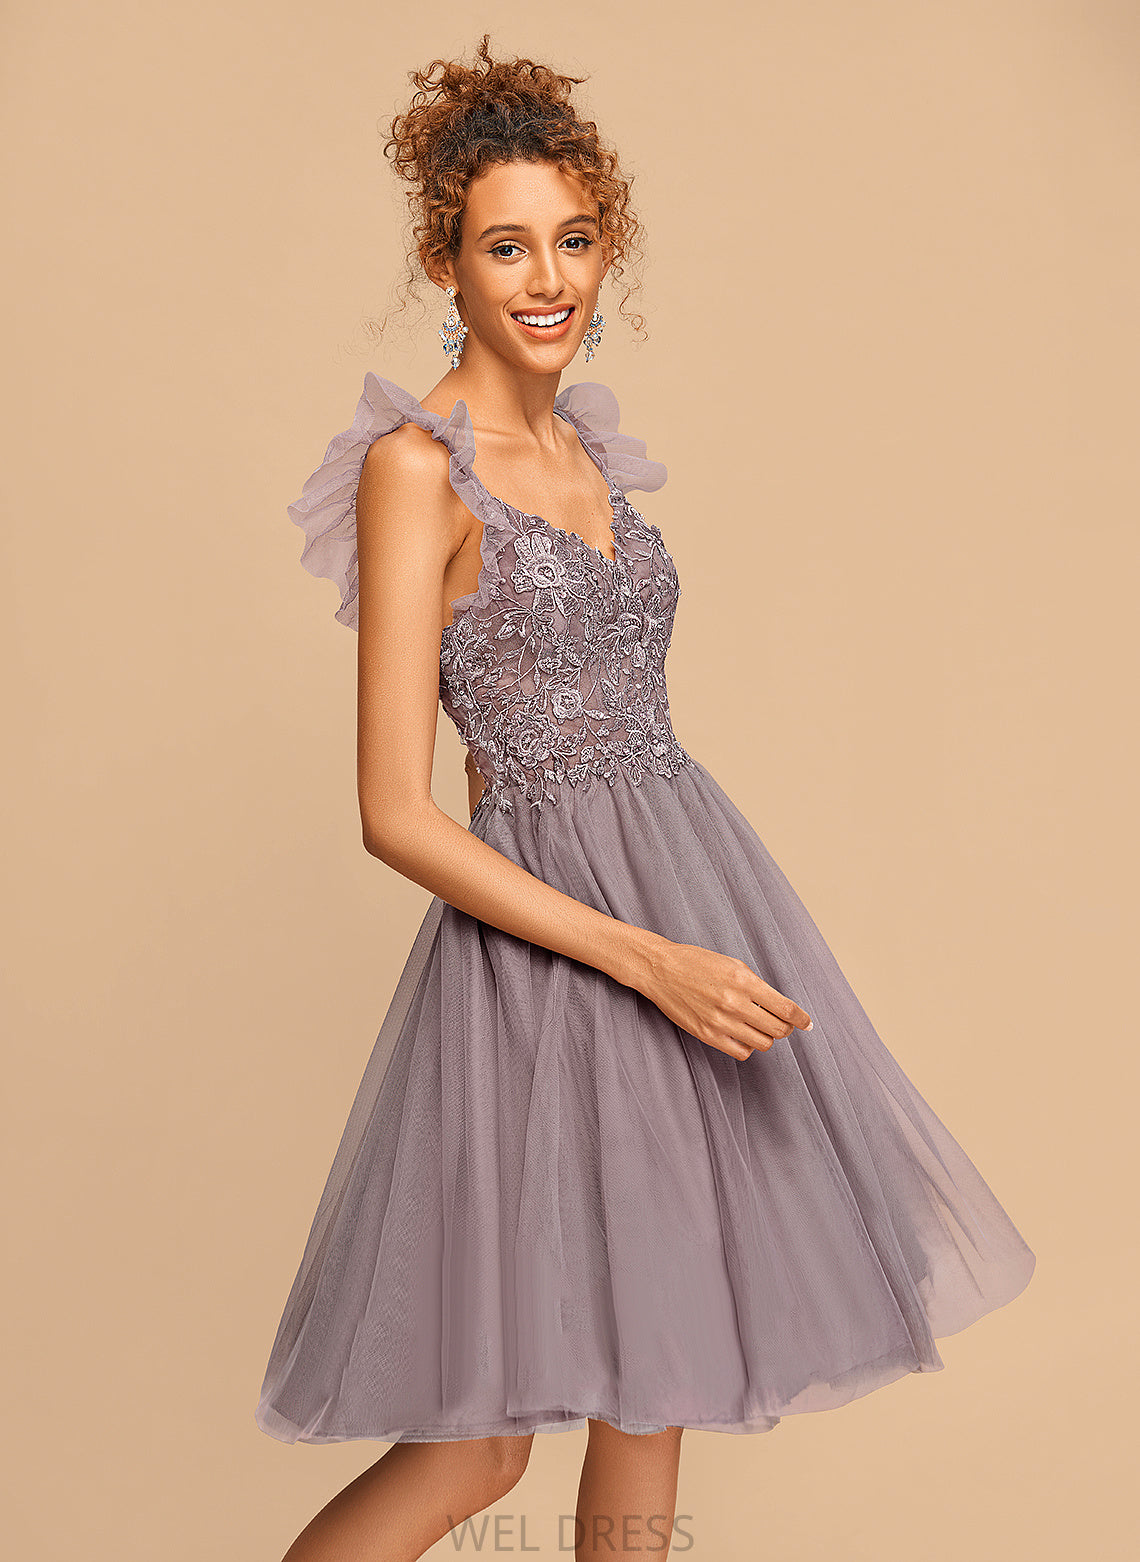 V-neck A-Line With Knee-Length Cascading Beatrice Tulle Dress Ruffles Homecoming Dresses Homecoming Lace